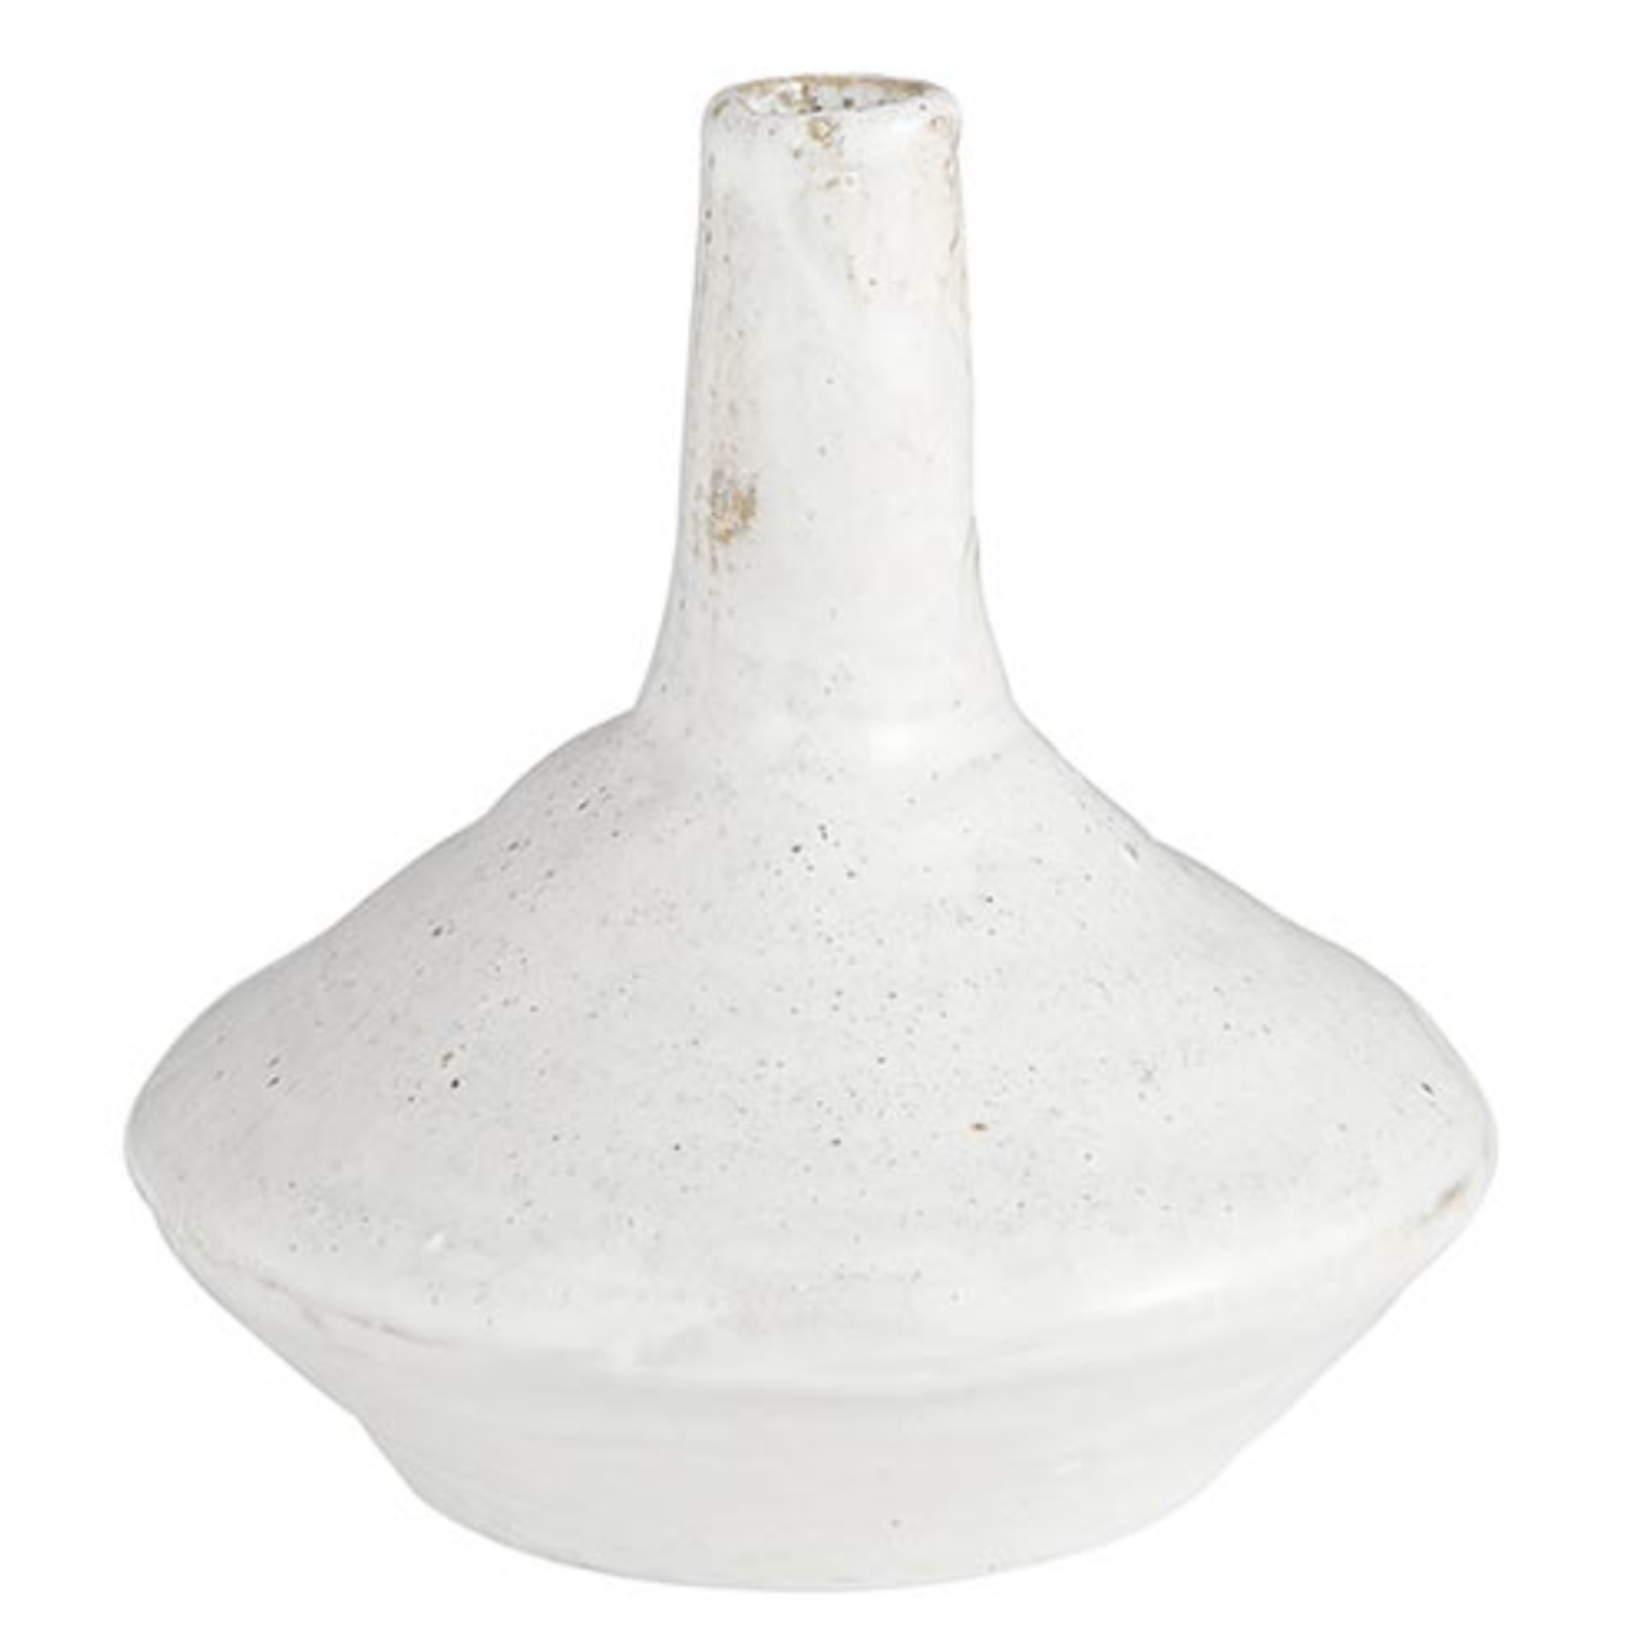 Outside The Box 7x7  Pointed Top  Organic Handcrafted White Ceramic Vase